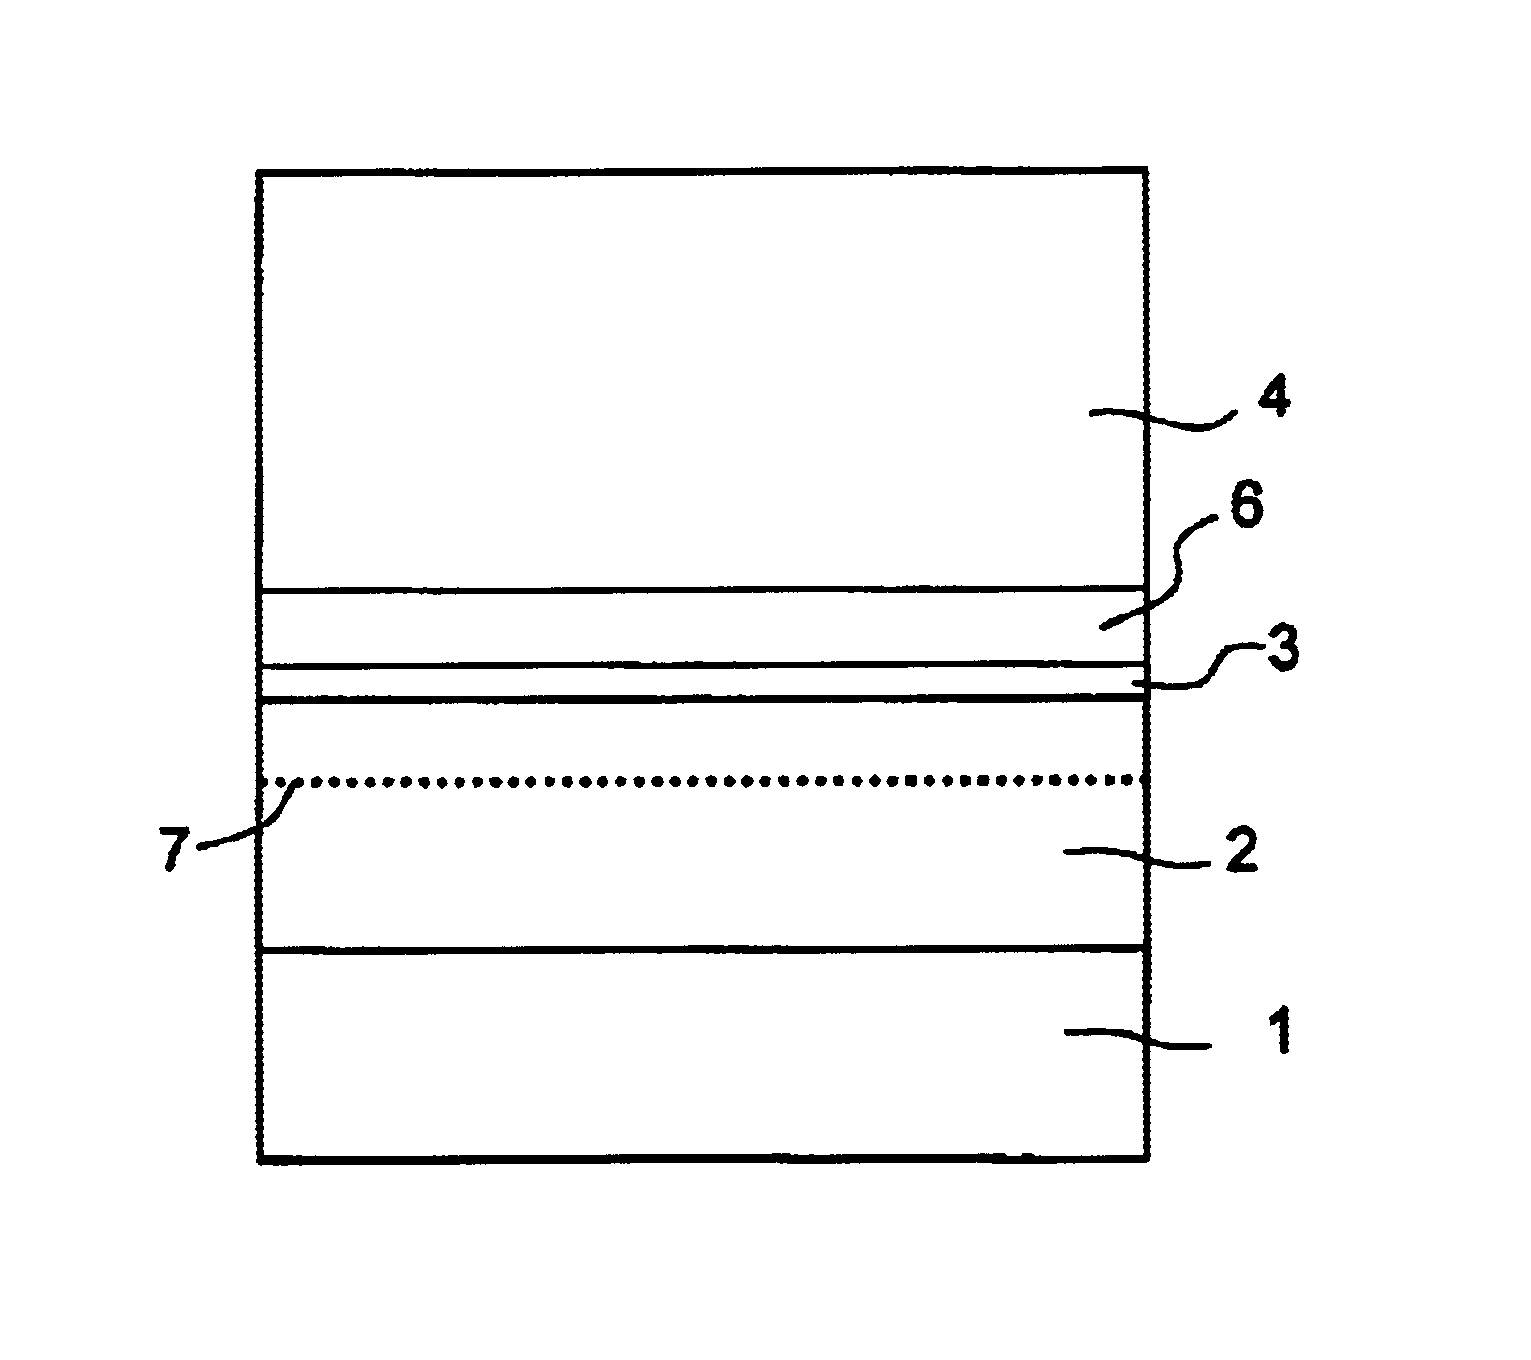 Process for transferring a layer of strained semiconductor material